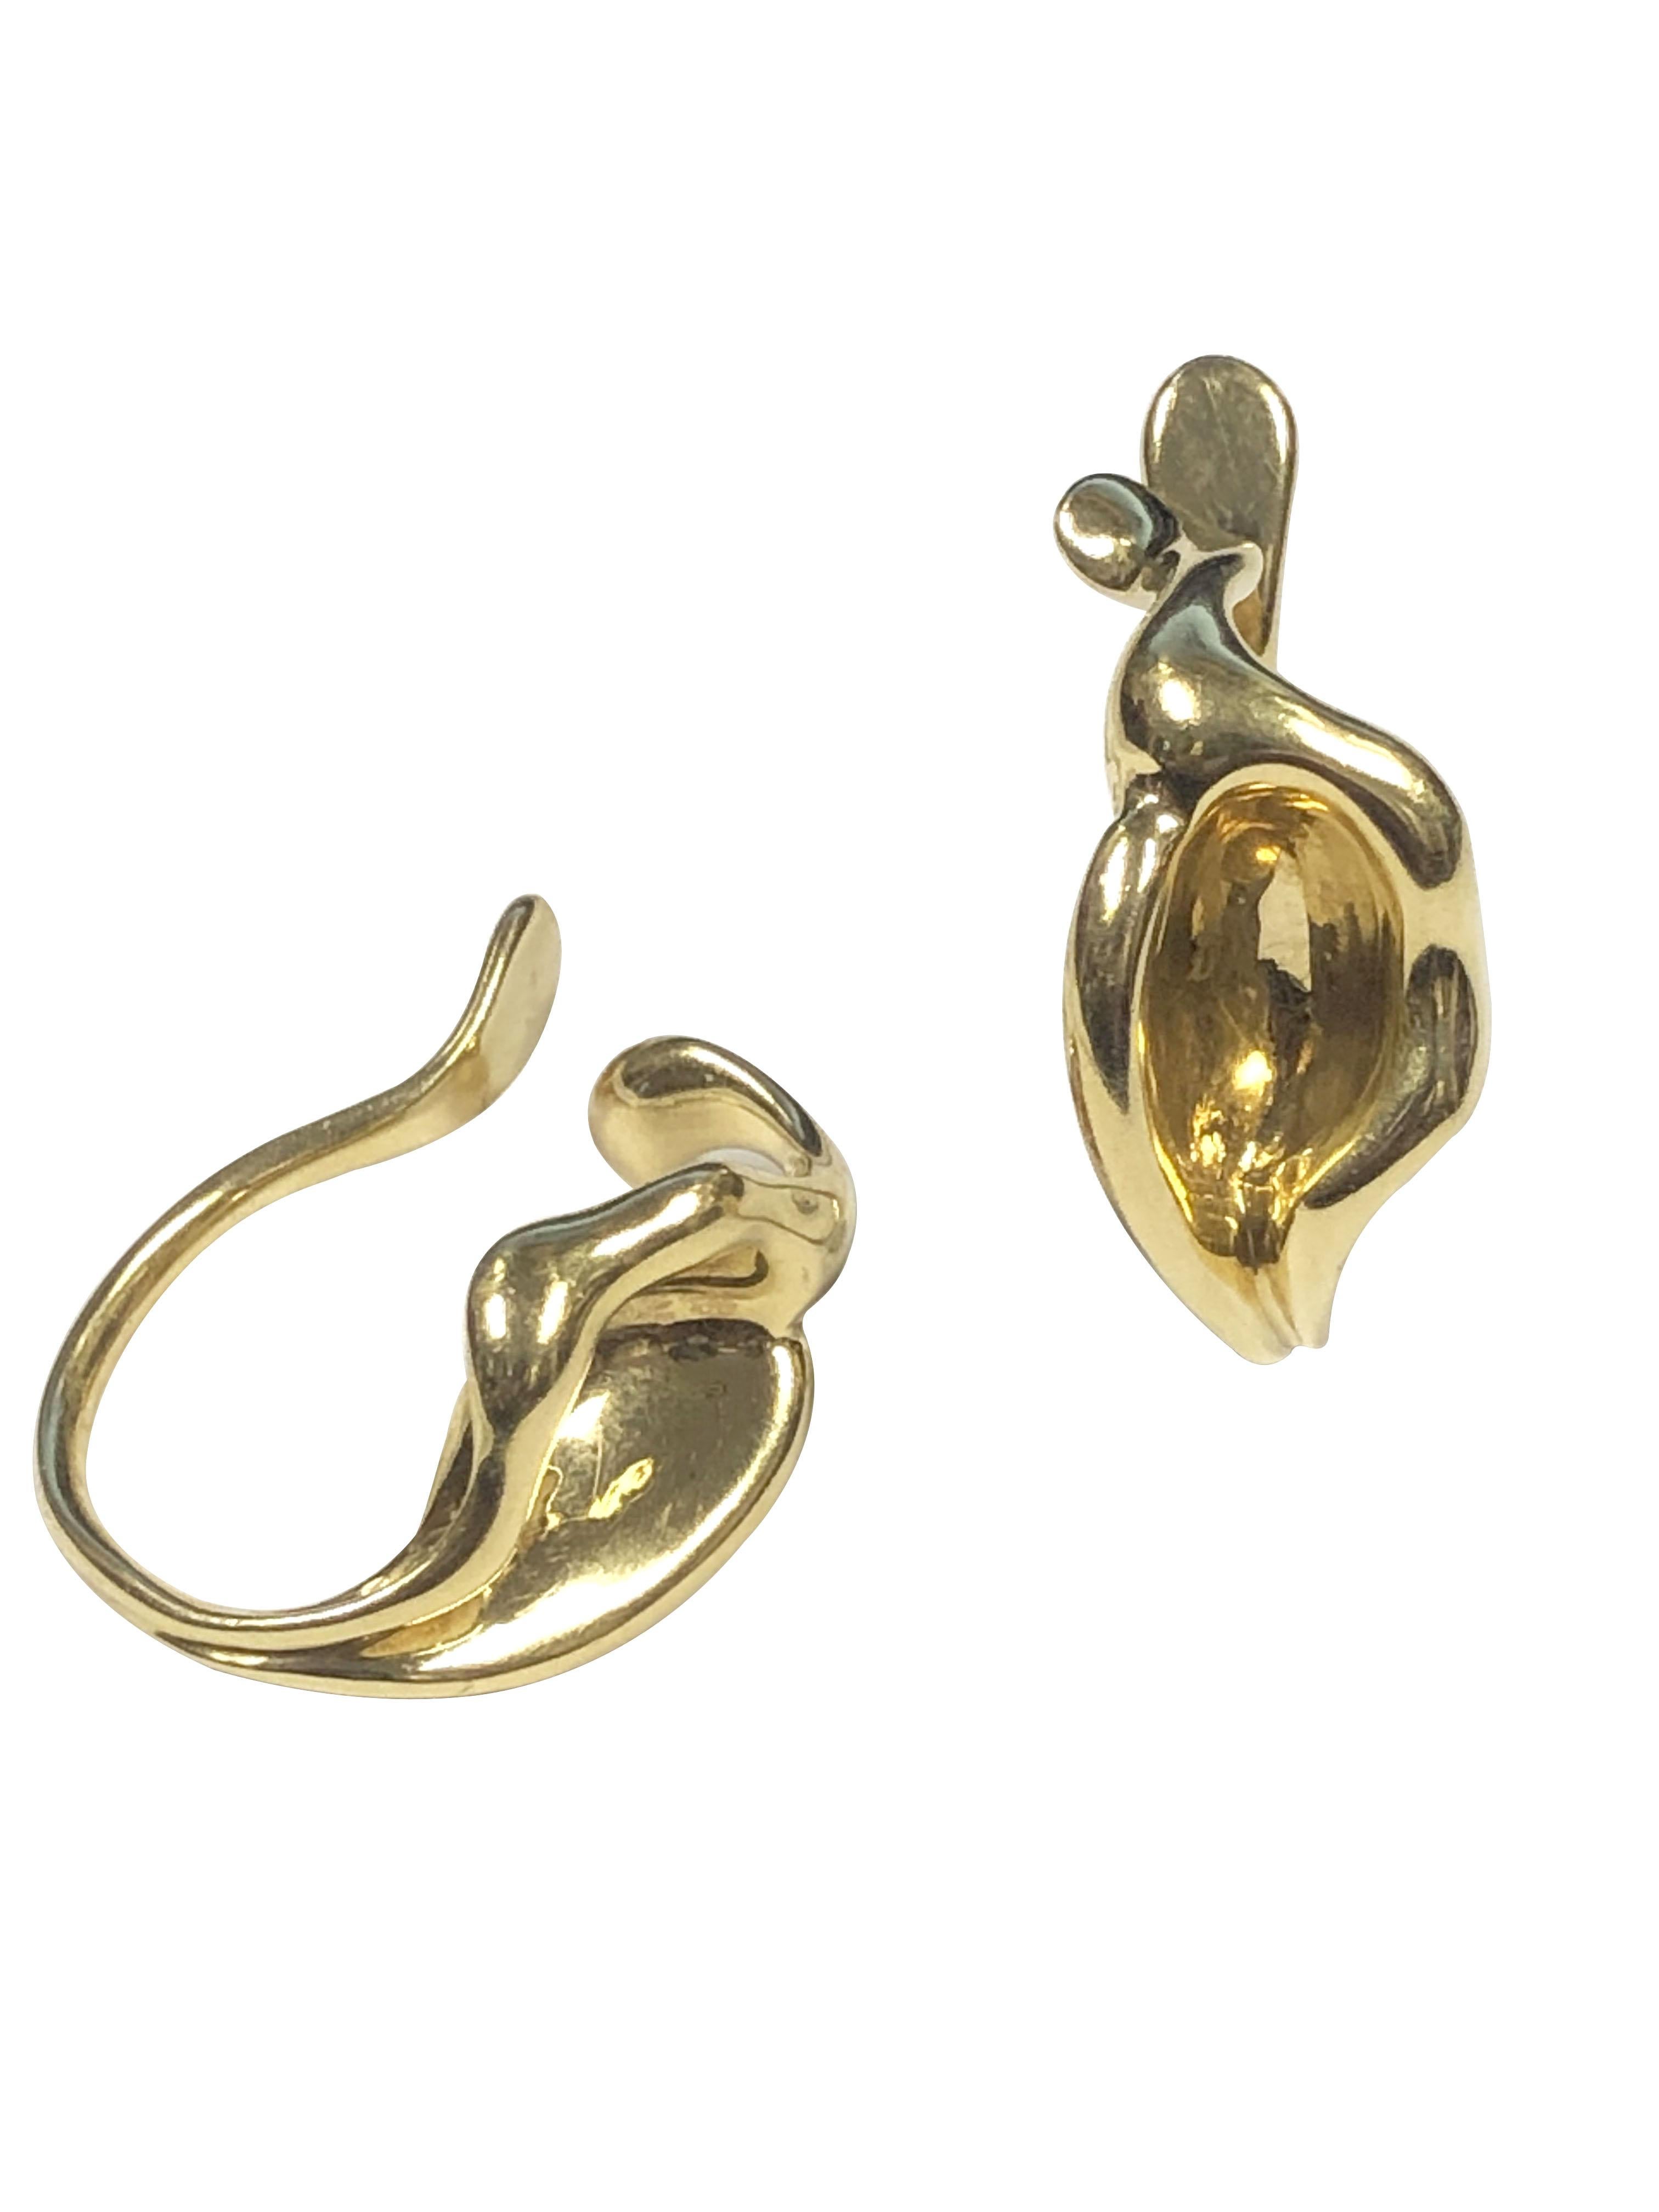 Circa 1980 Elsa Peretti for Tiffany & Company 18k Yellow Gold Calla Lily Flower Earrings, measuring 1 1/8 inches in length X 5/8 inch wide and weighing 18.4 Grams. These are the earlier of the collection, harder to find pair that are pressure fit